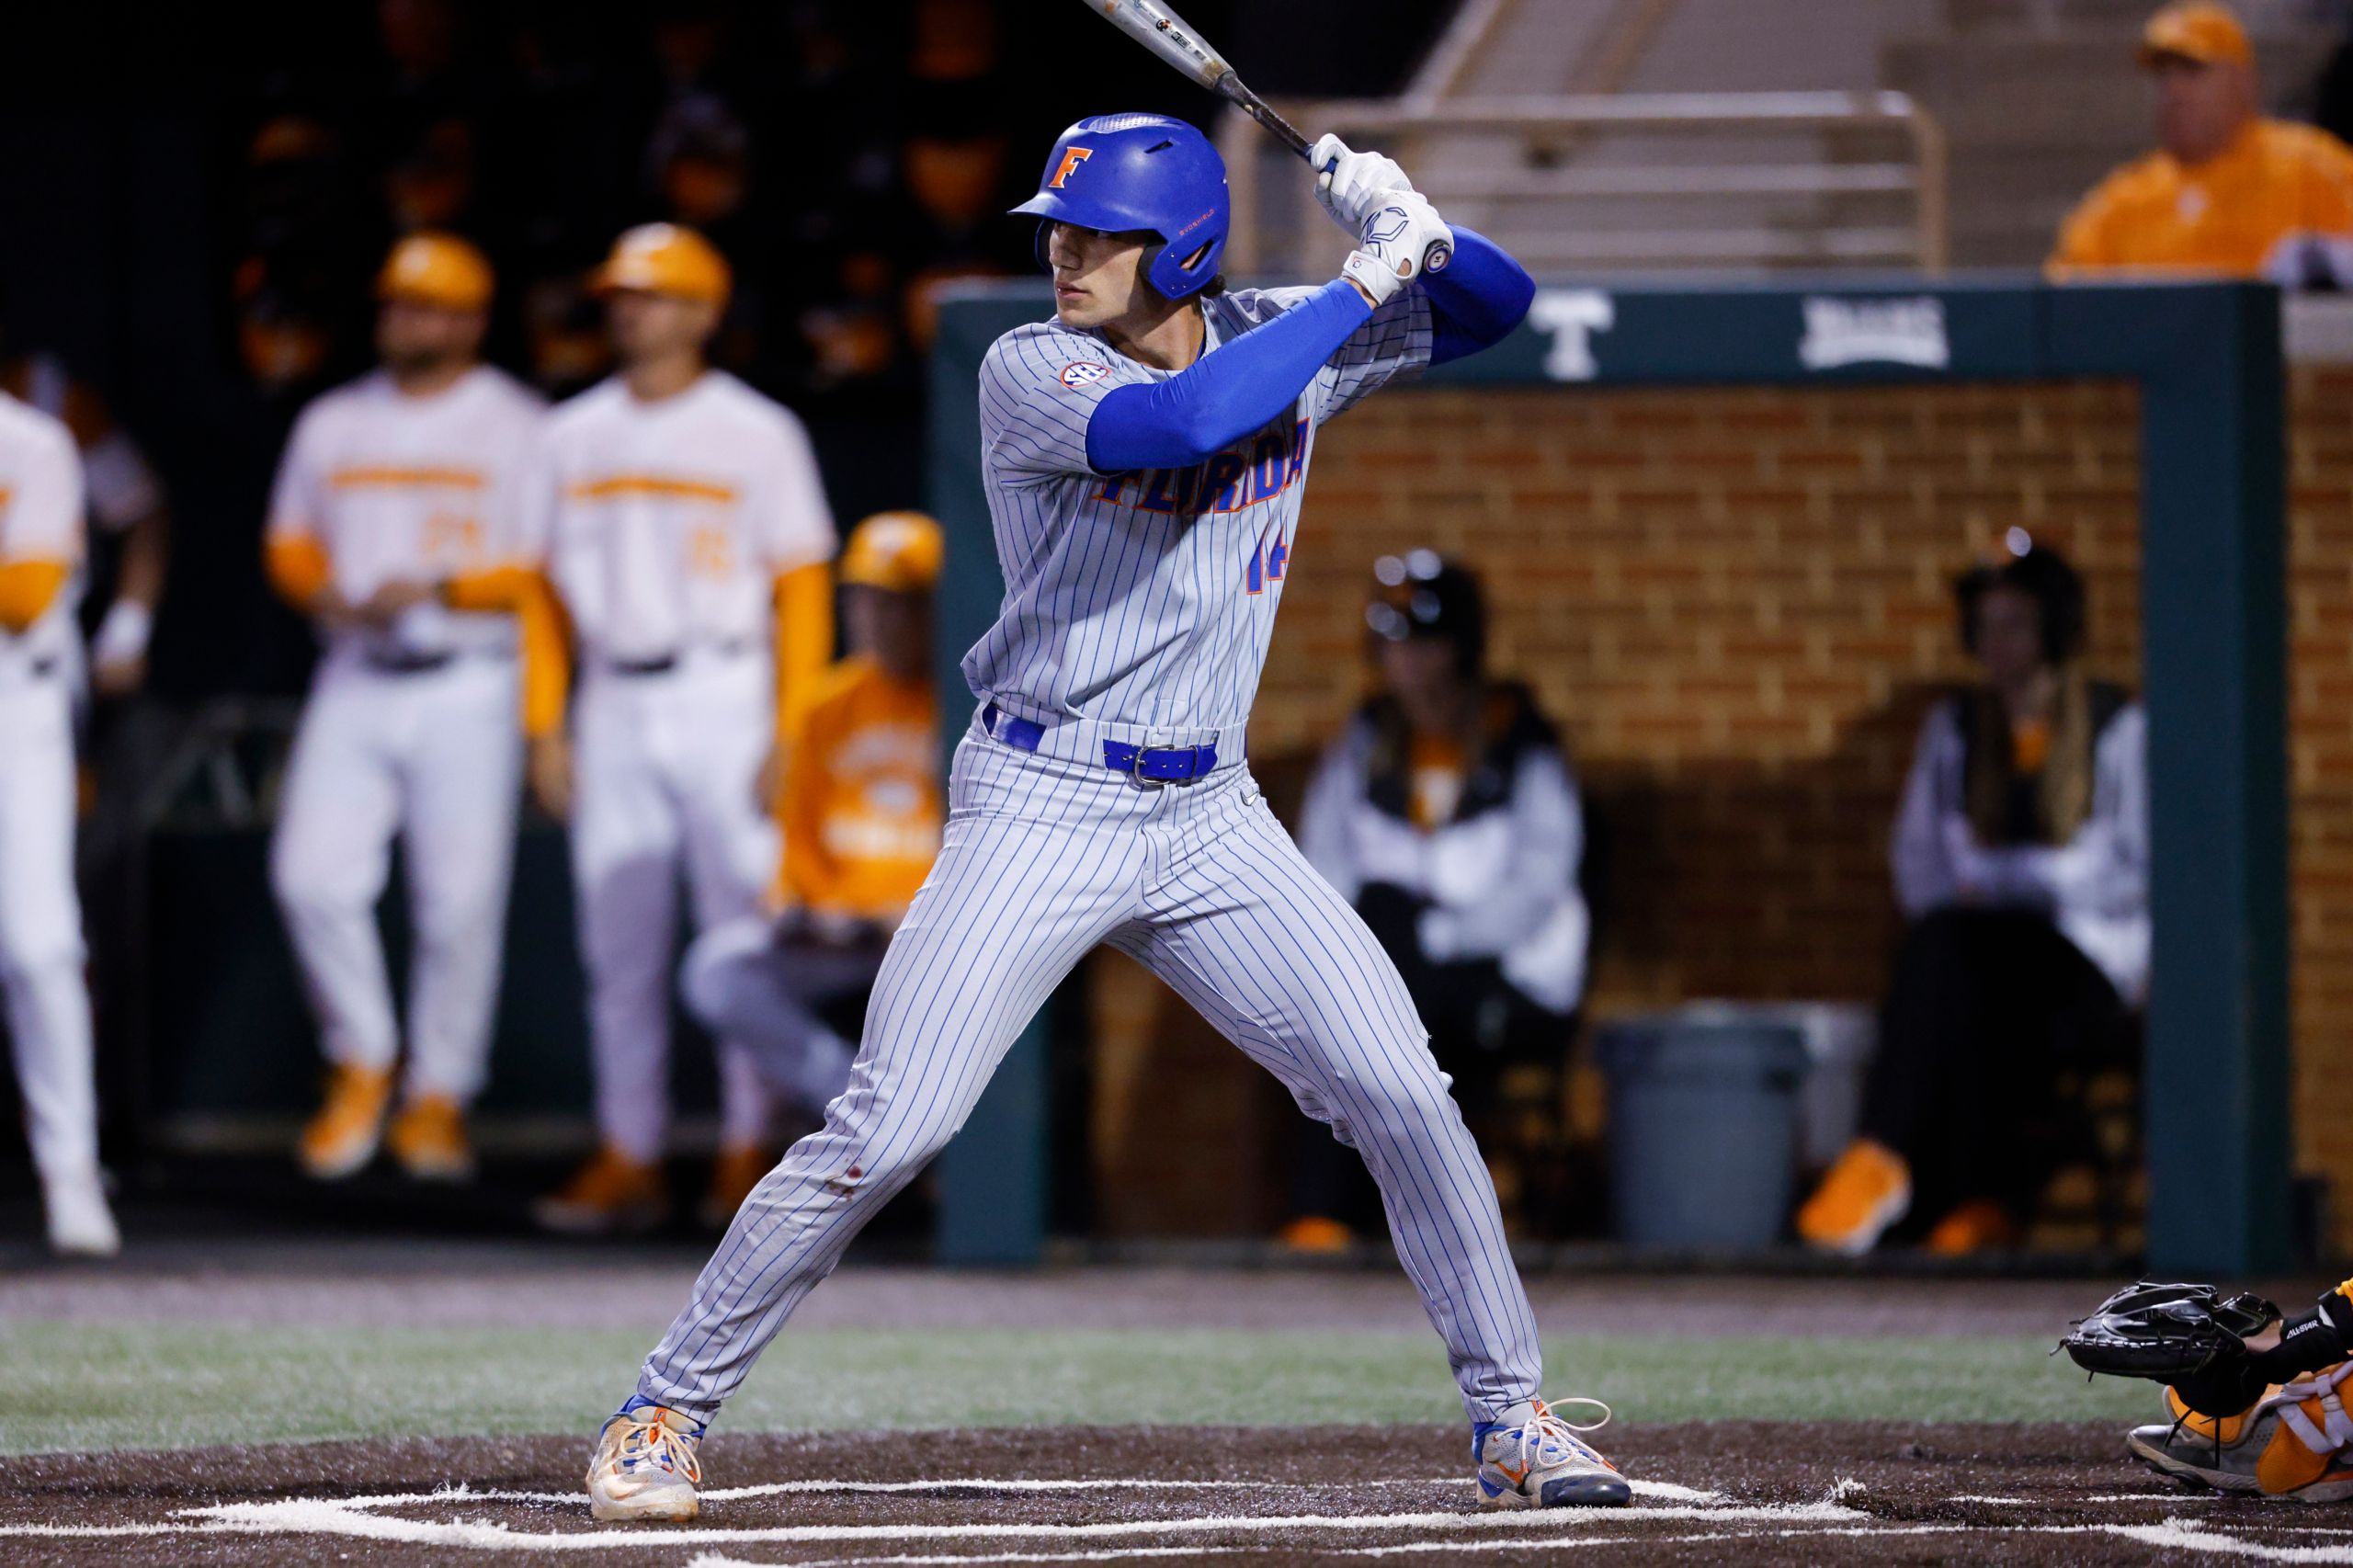 College Baseball Week 4 Standouts: Chase Burns Strikes 14, Jac Caglianone Dominates (Hot Sheet)